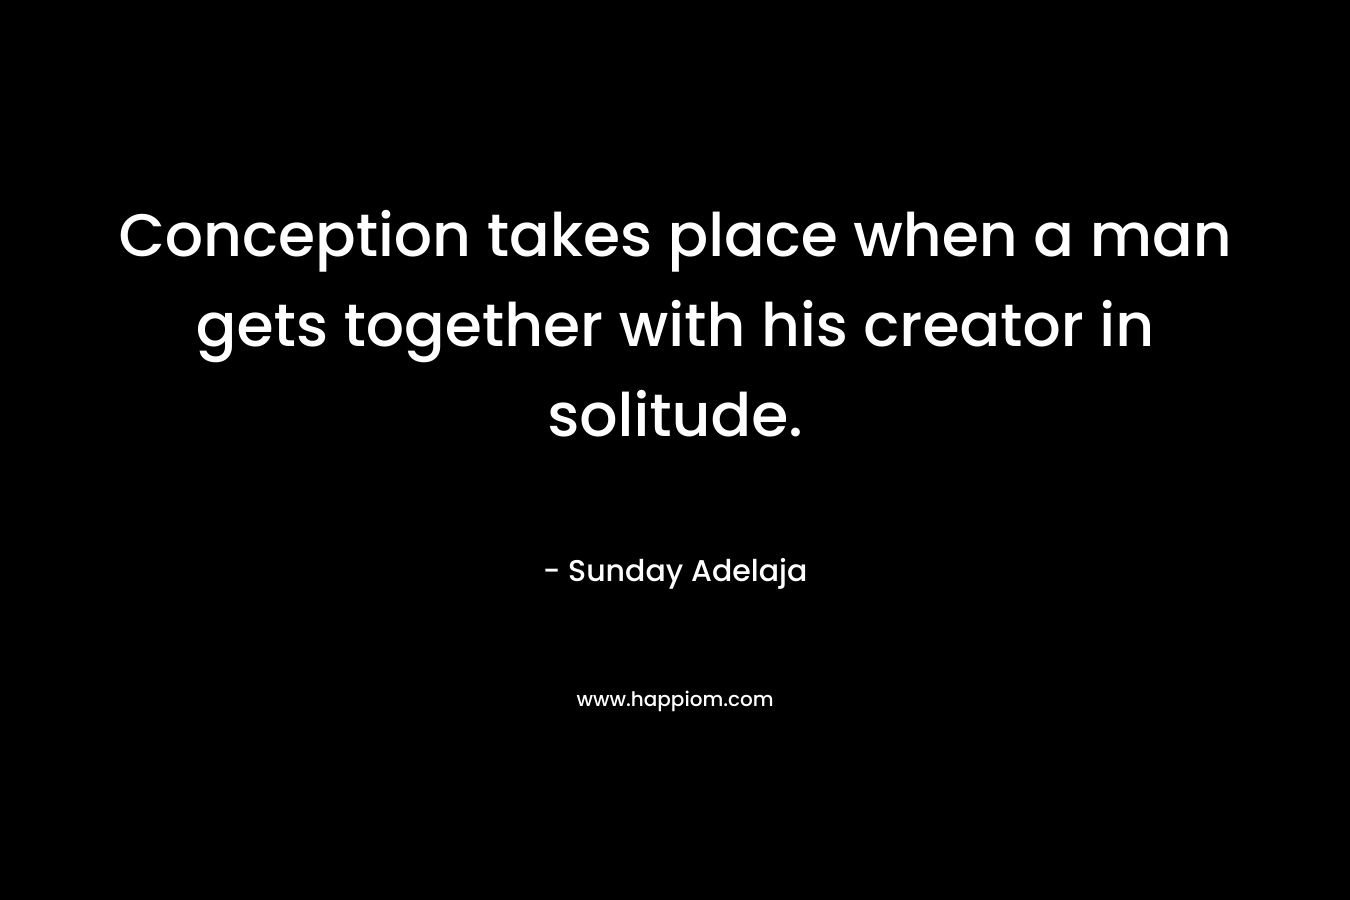 Conception takes place when a man gets together with his creator in solitude.